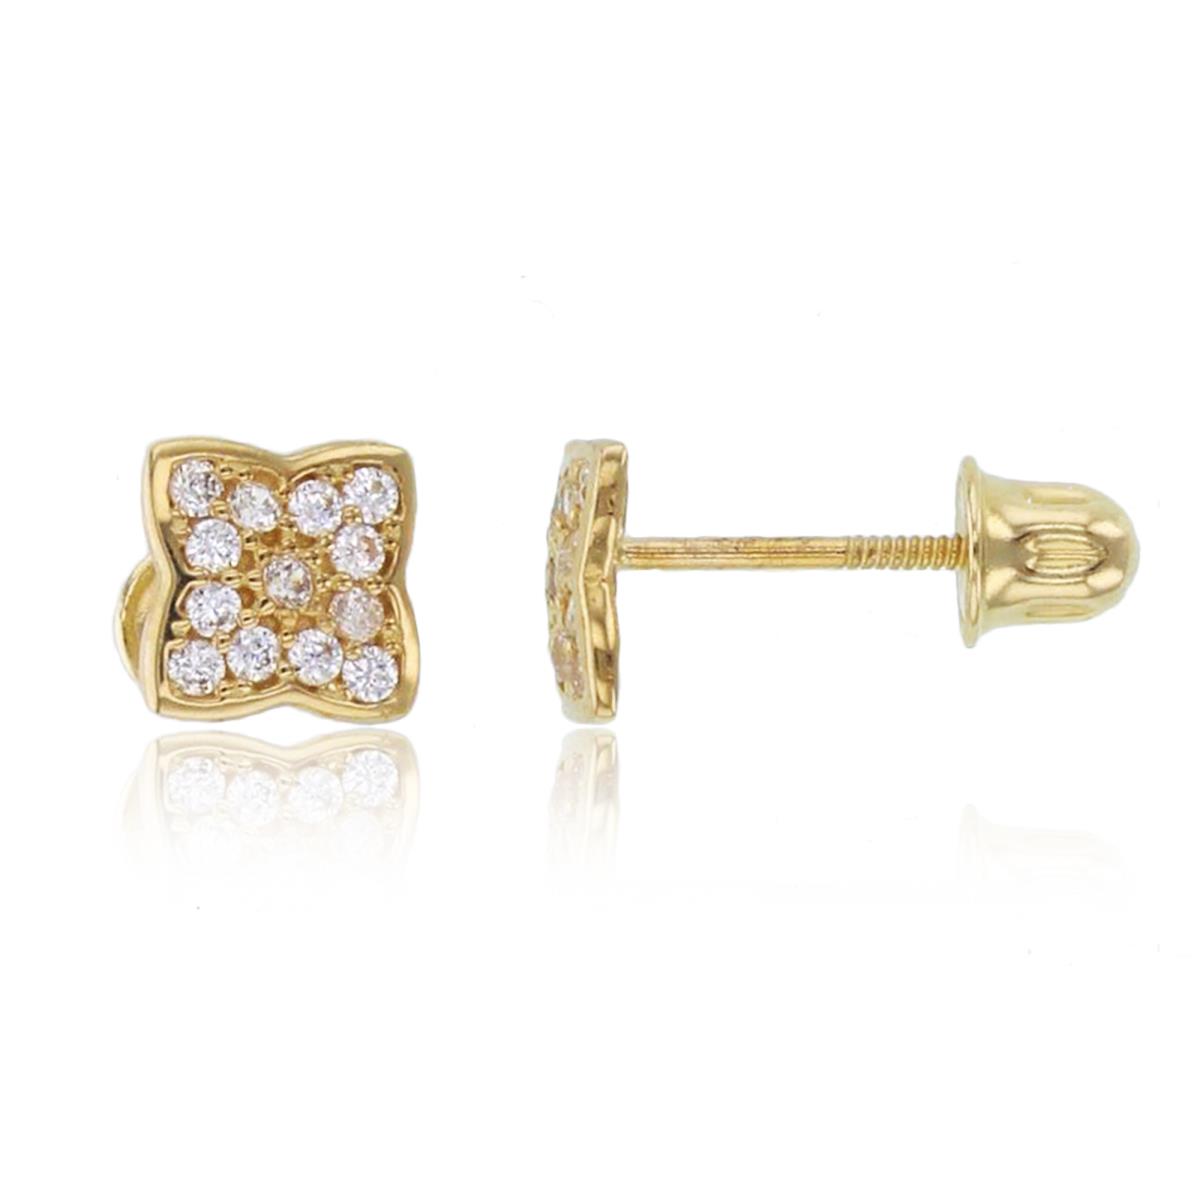 14K Yellow Gold Rnd CZ Pave Clover Studs with Screw Backs